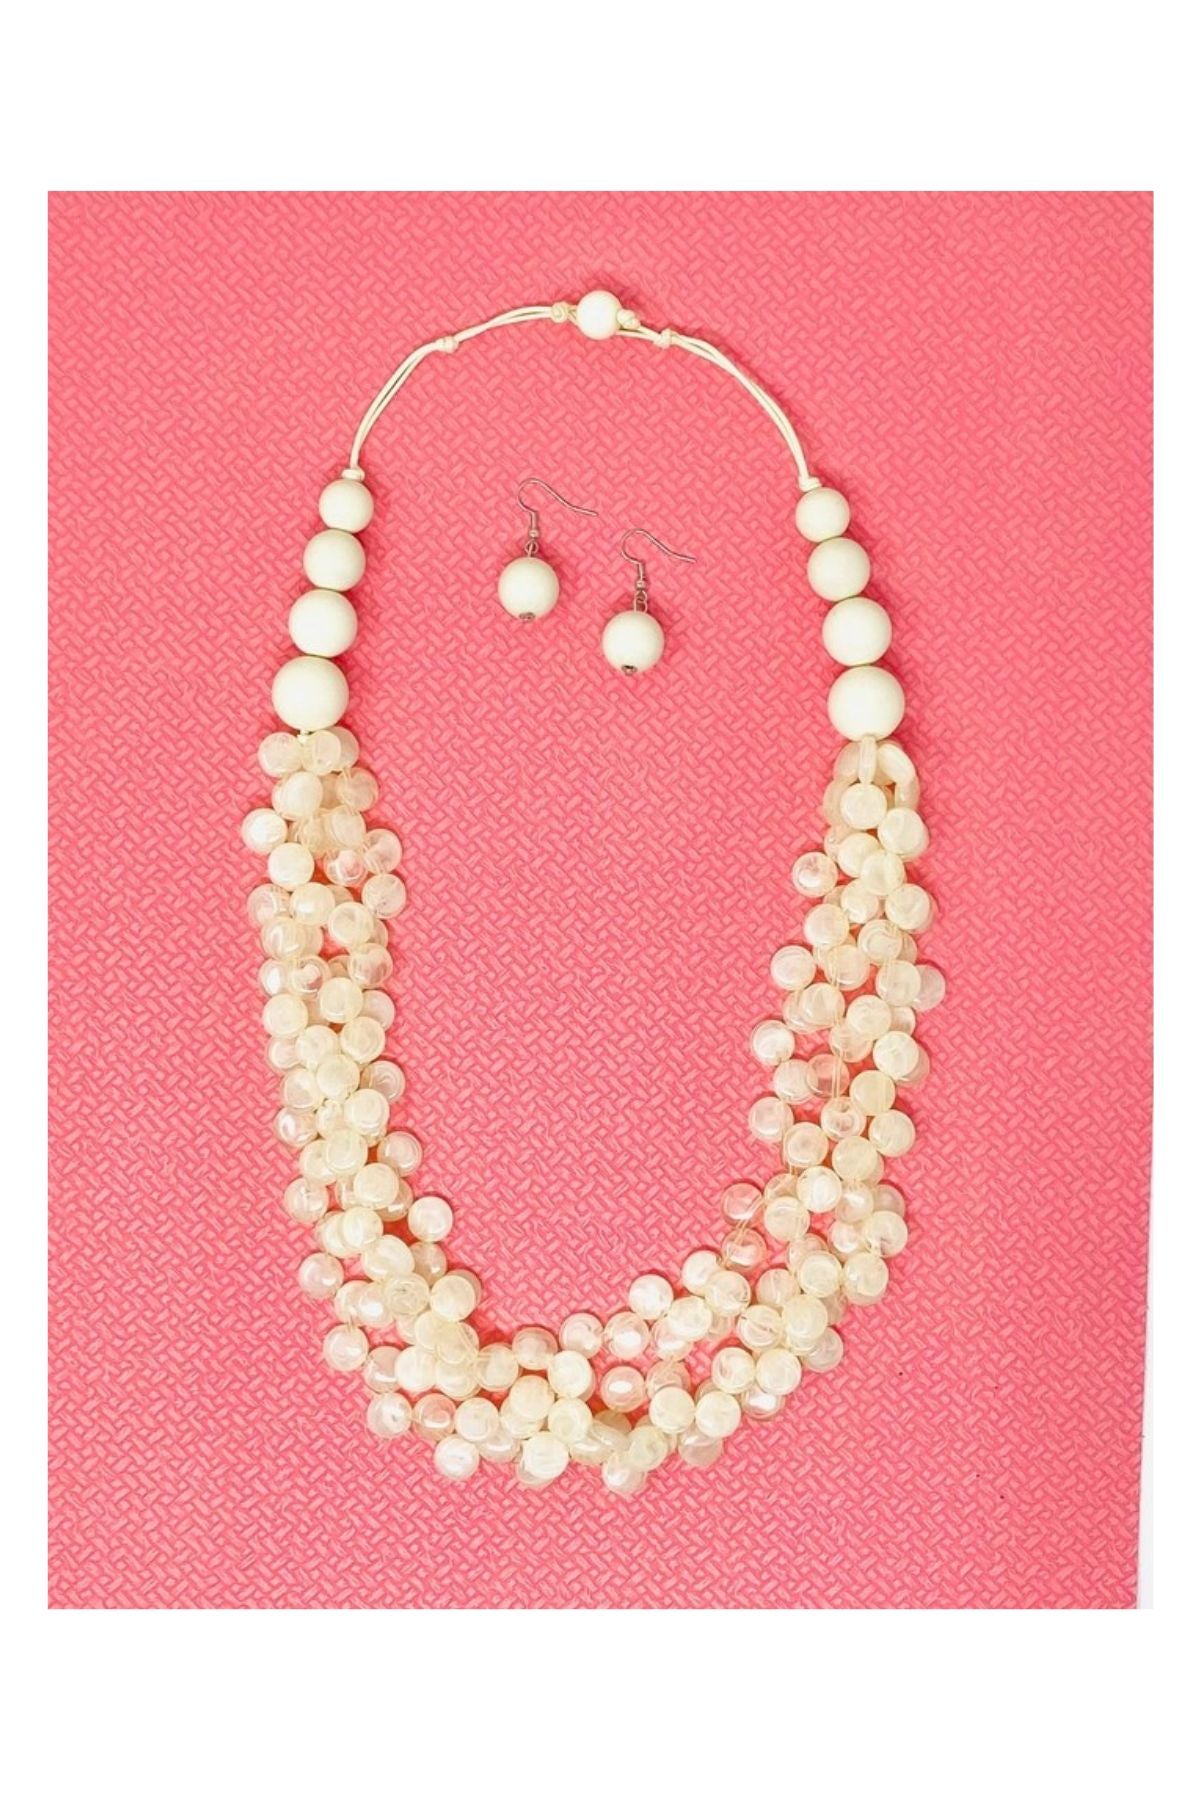 Ivory necklace with matching earrings